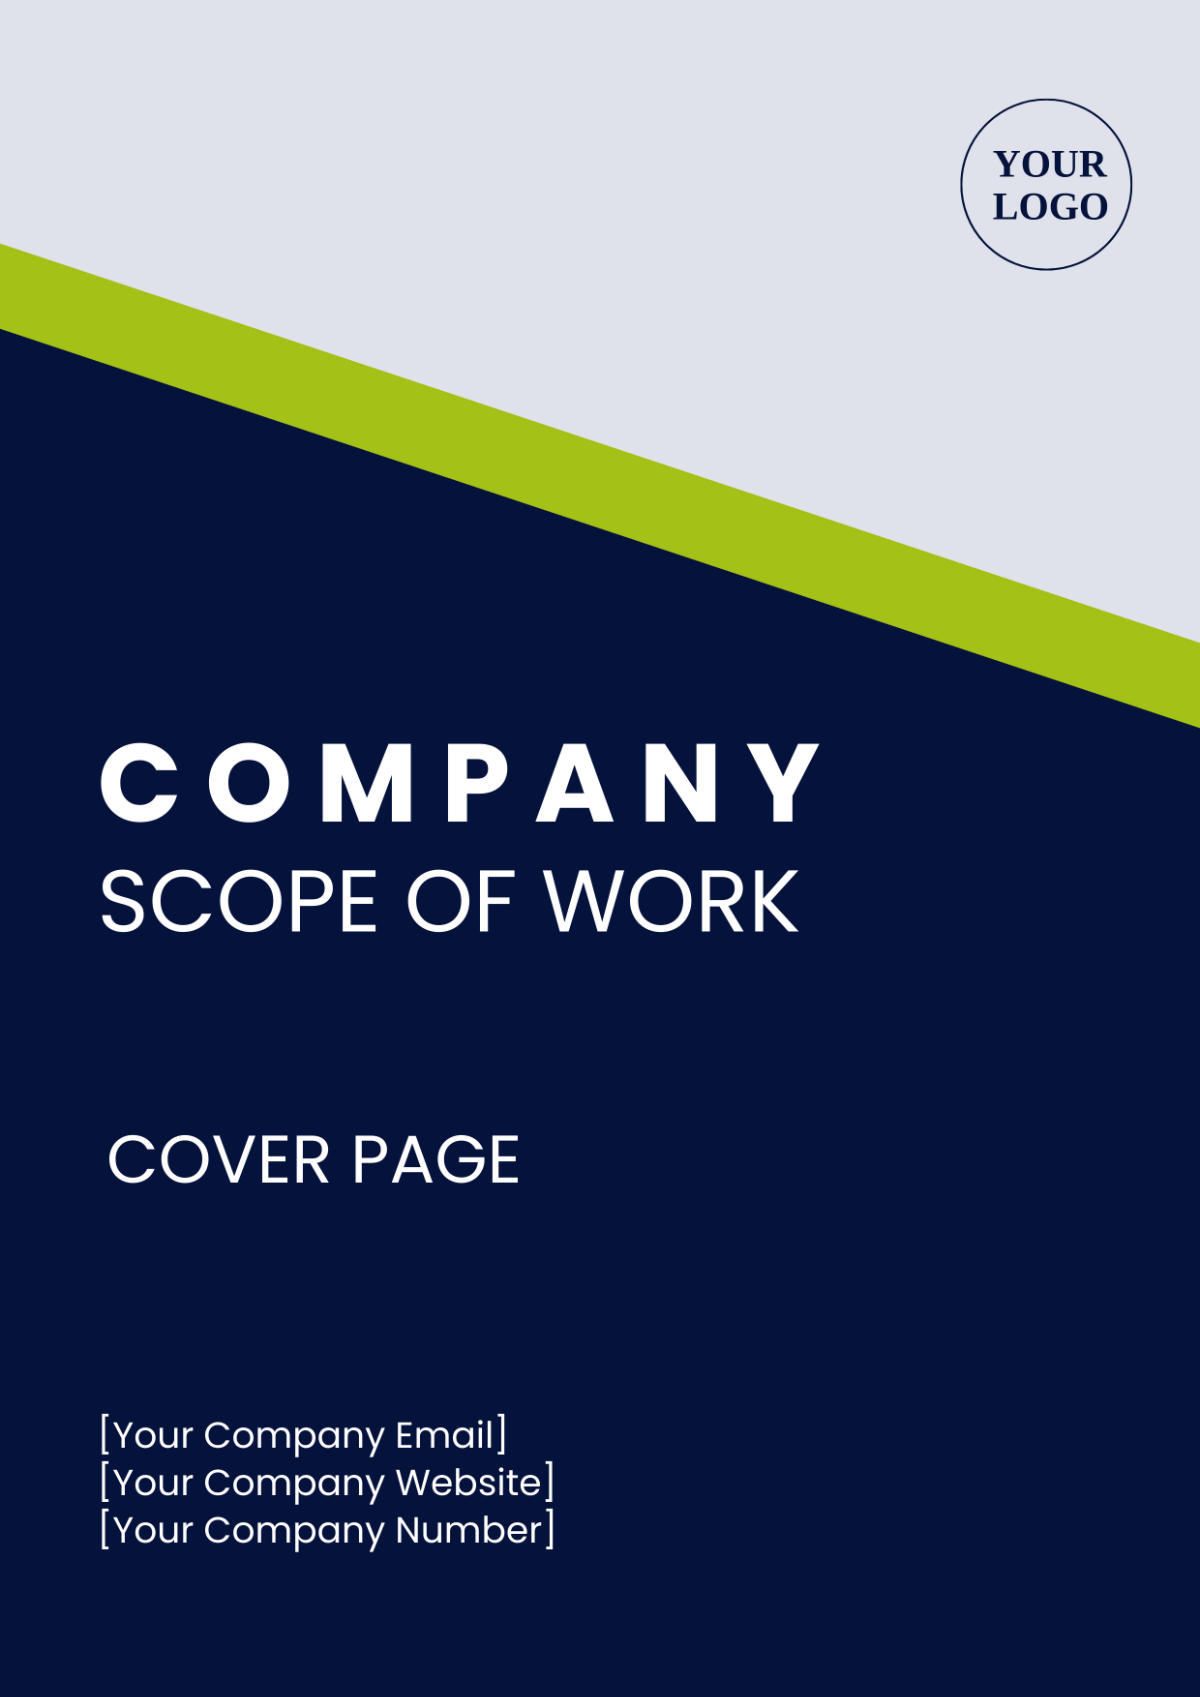 Company Scope of Work Cover Page